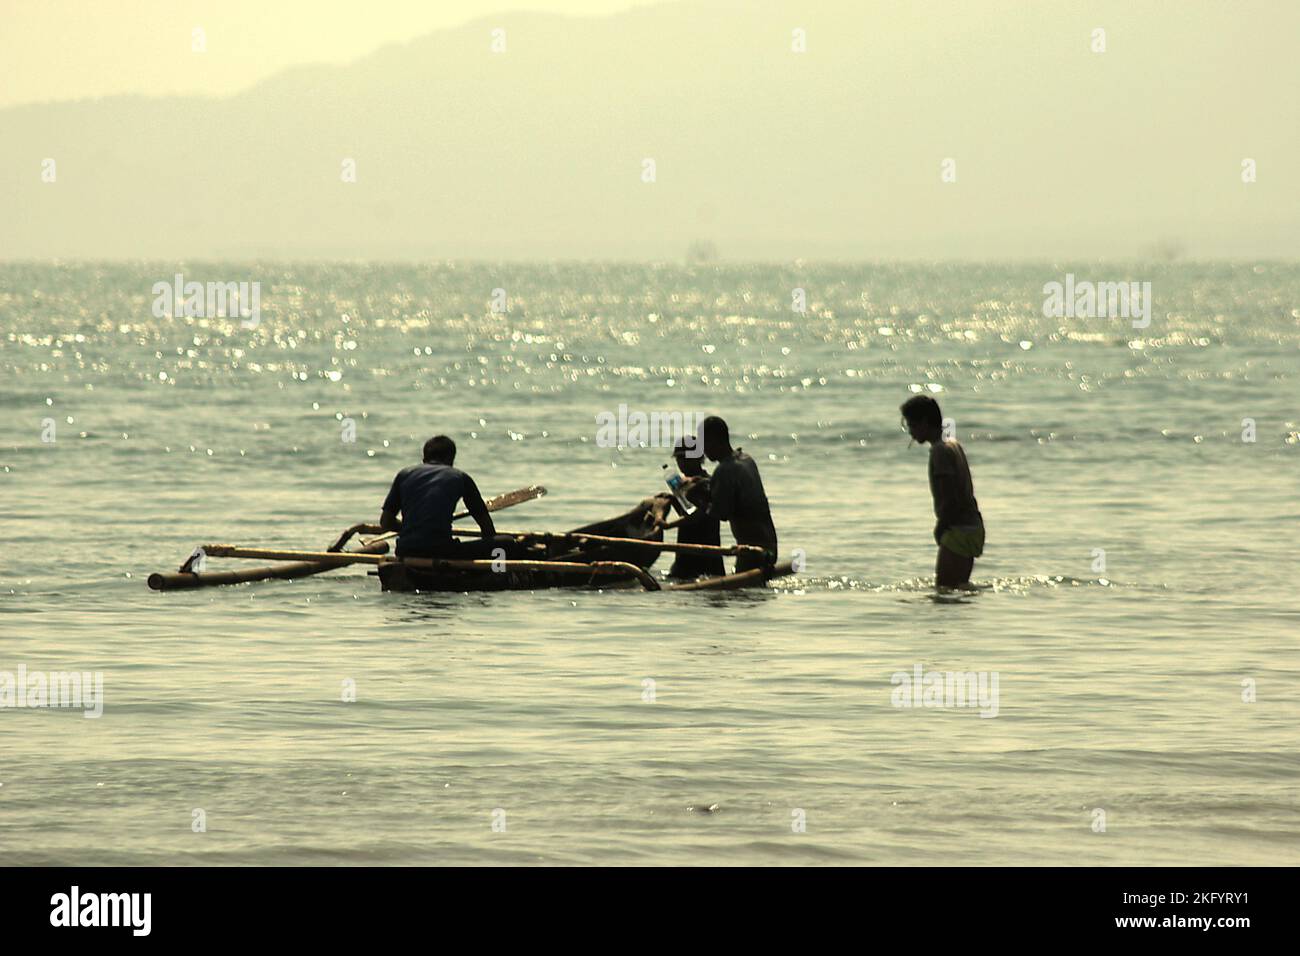 Men preparing an outrigger canoe for national park visitors on the coastal water of Handeuleum Island, a part of Ujung Kulon National Park in Pandeglang, Banten, Indonesia. Stock Photo